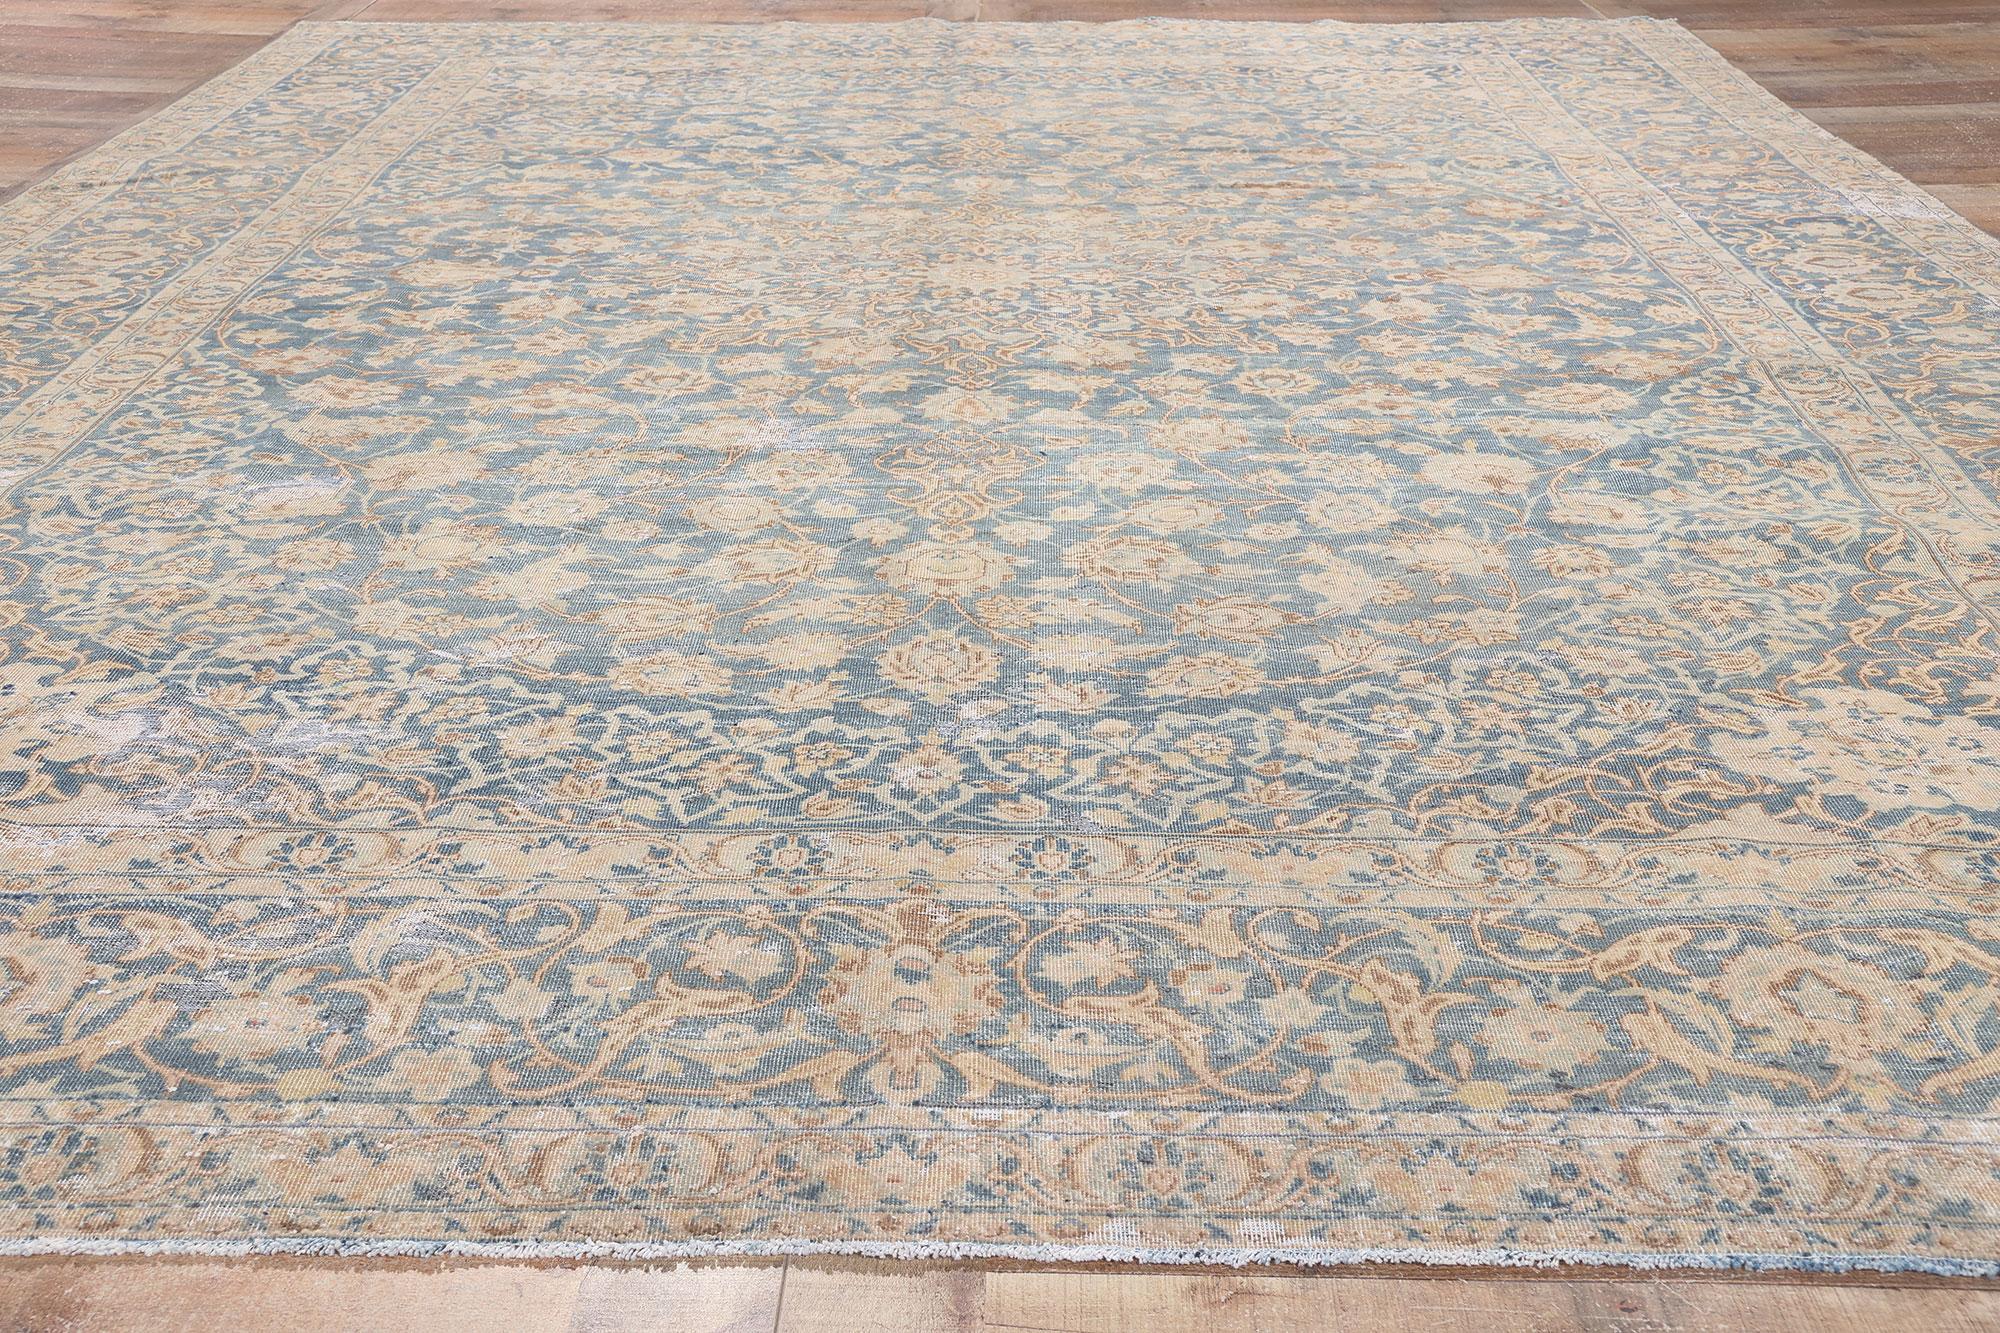 Distressed Antique Persian Tabriz Rug, Faded Soft Earth-Tone Colors For Sale 2